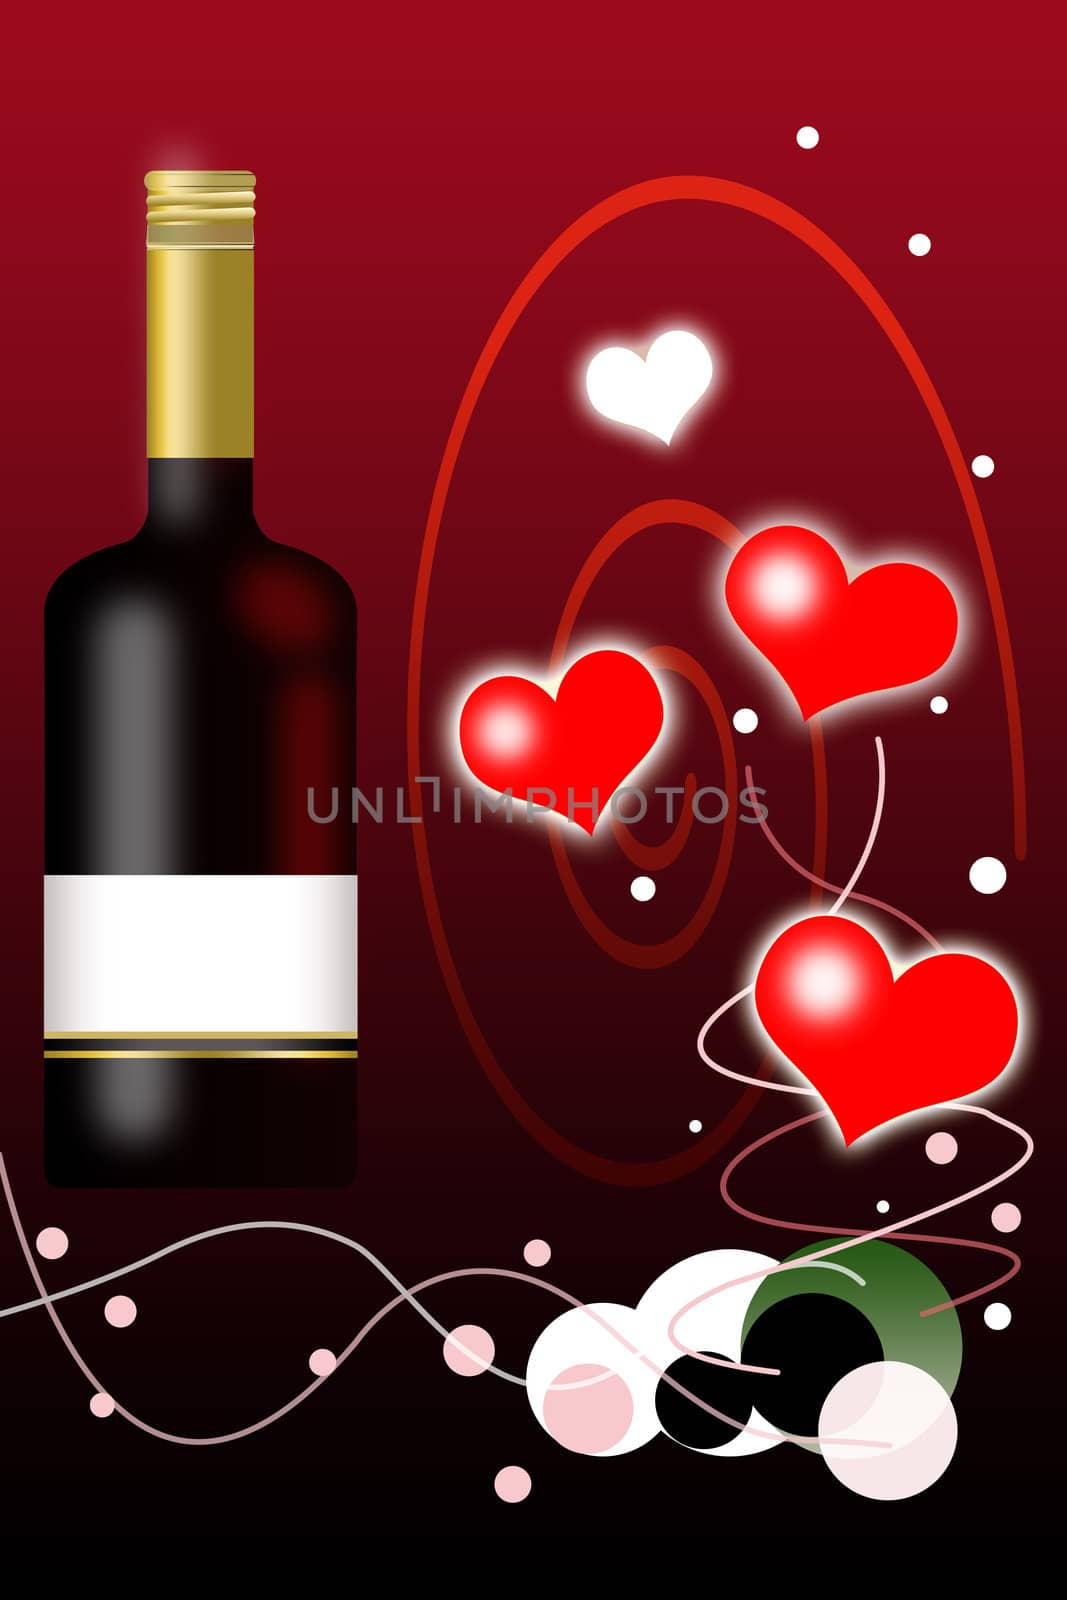 Valentines Day Background and Wine Bottle with Blank Label by mwp1969